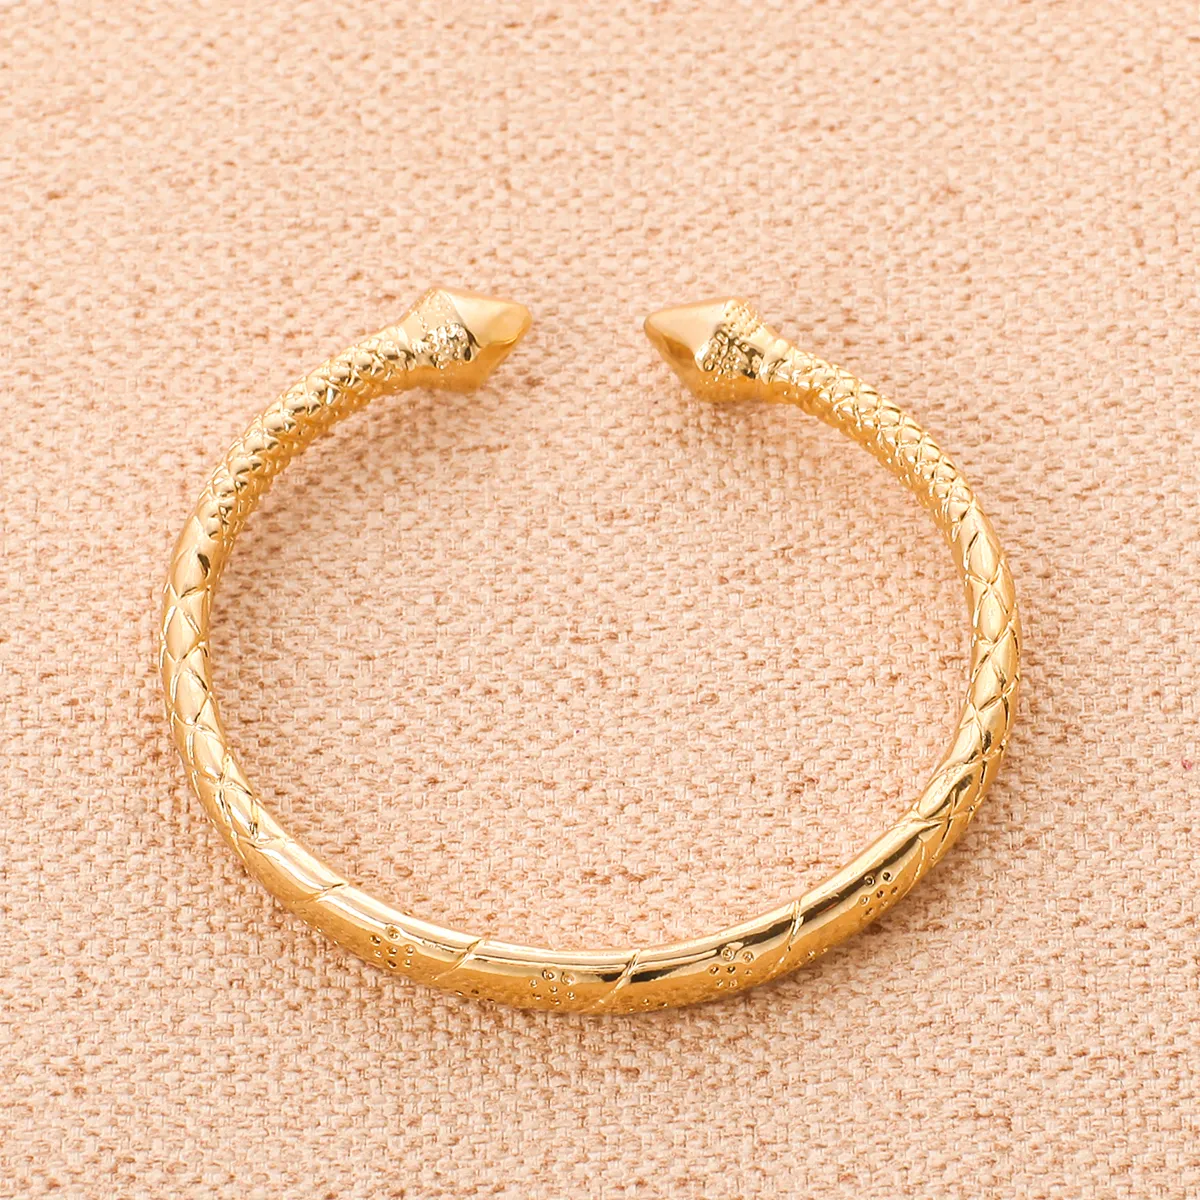 Buy 22k Gold Bangle Bracelet Indian Gold Jewelry Online in India - Etsy